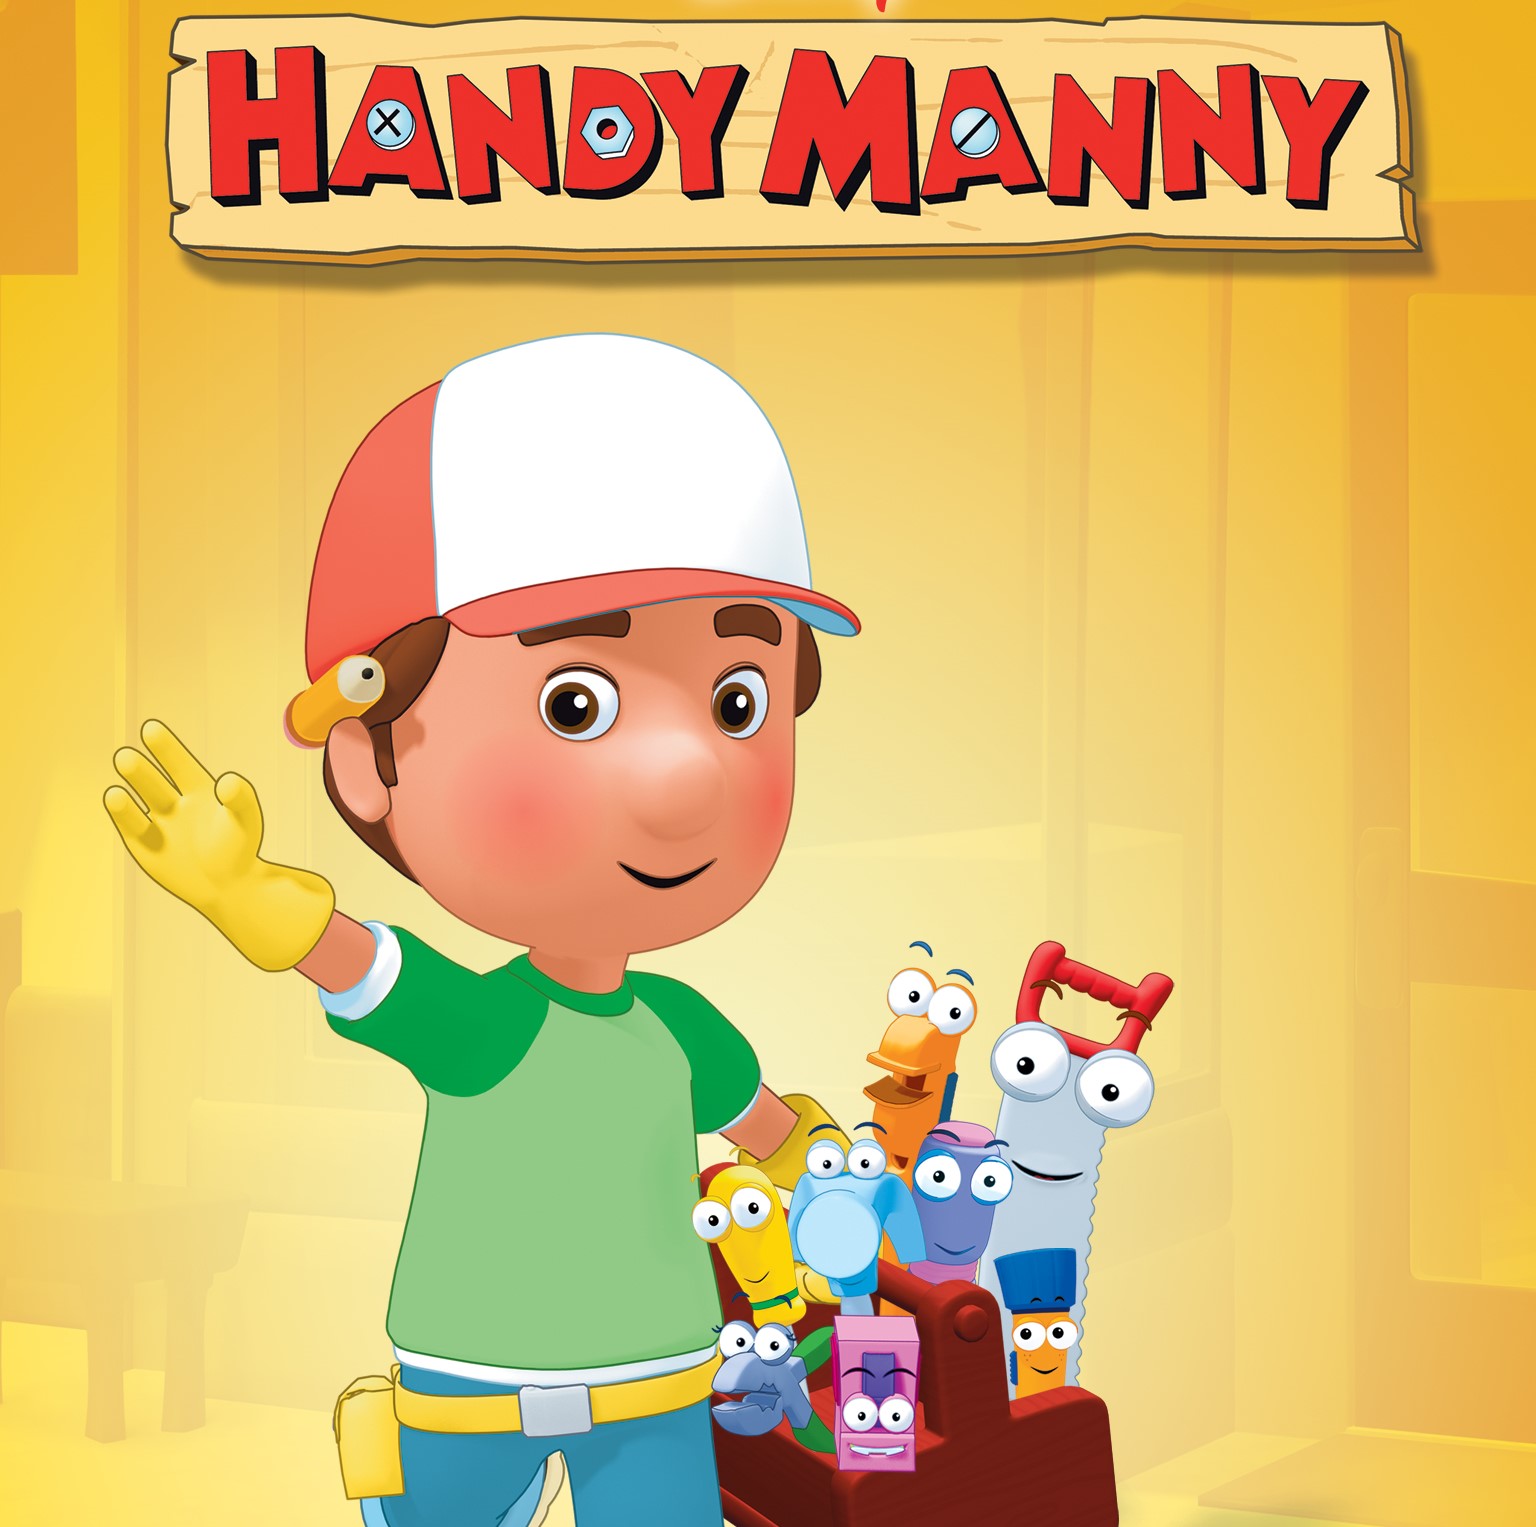 16-facts-about-manny-handy-manny